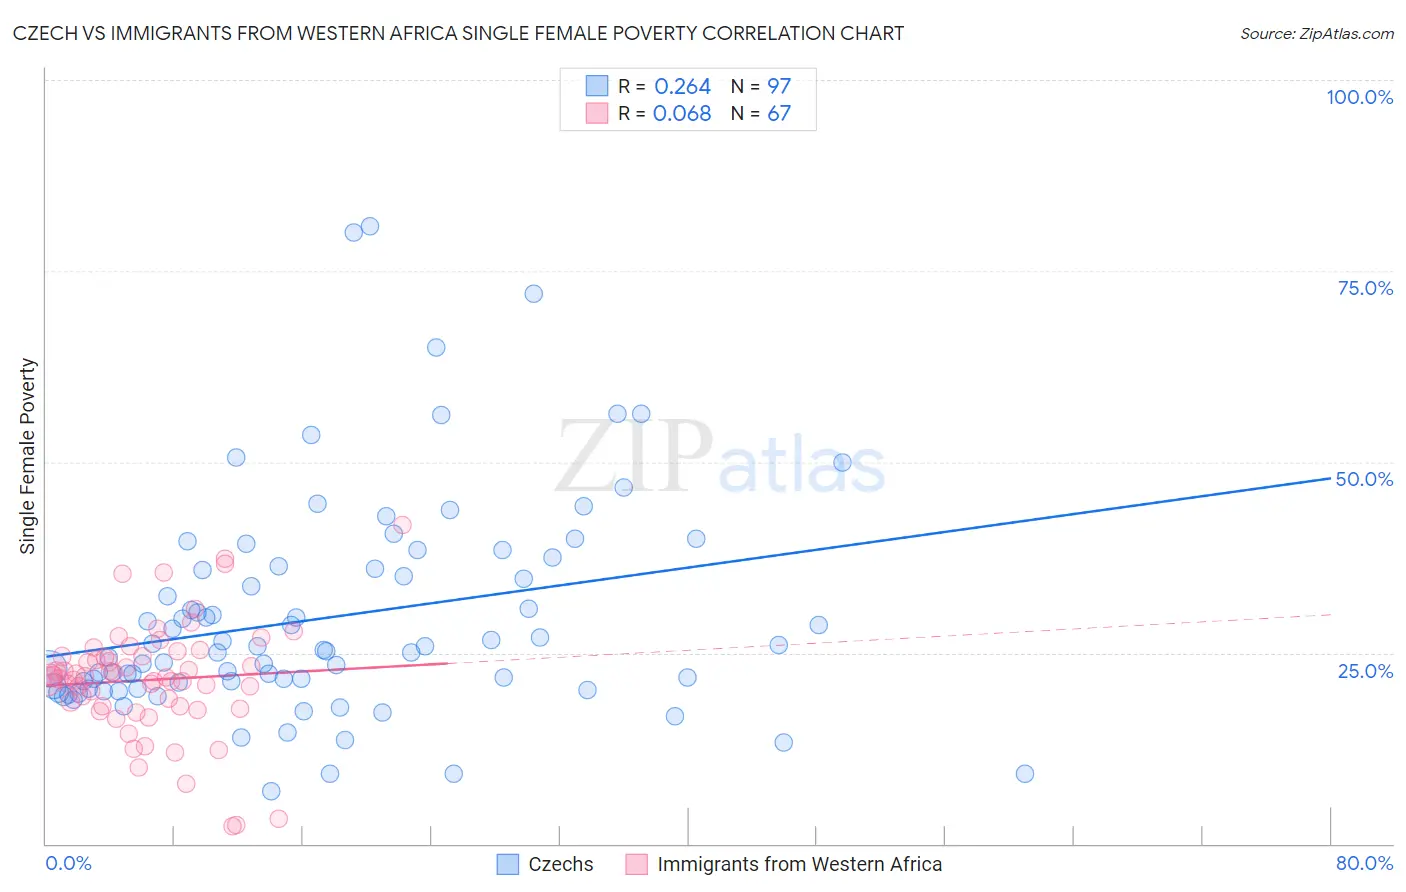 Czech vs Immigrants from Western Africa Single Female Poverty